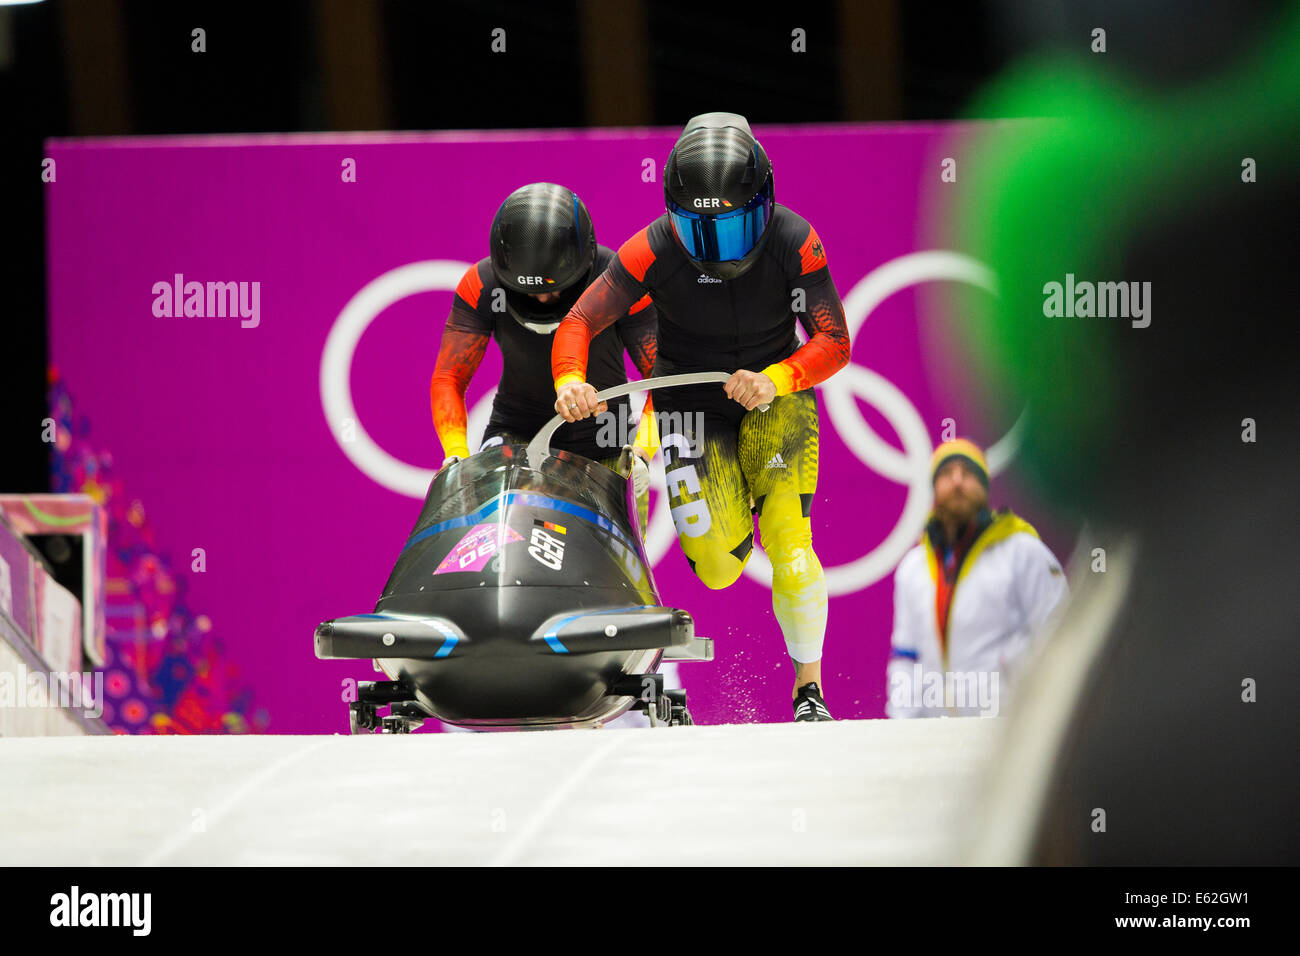 Anja Schneiderheinze and Stephanie Schneider GER-3 competing in the Women's Bobsleigh at the Olympic Winter Games, Sochi 2014 Stock Photo